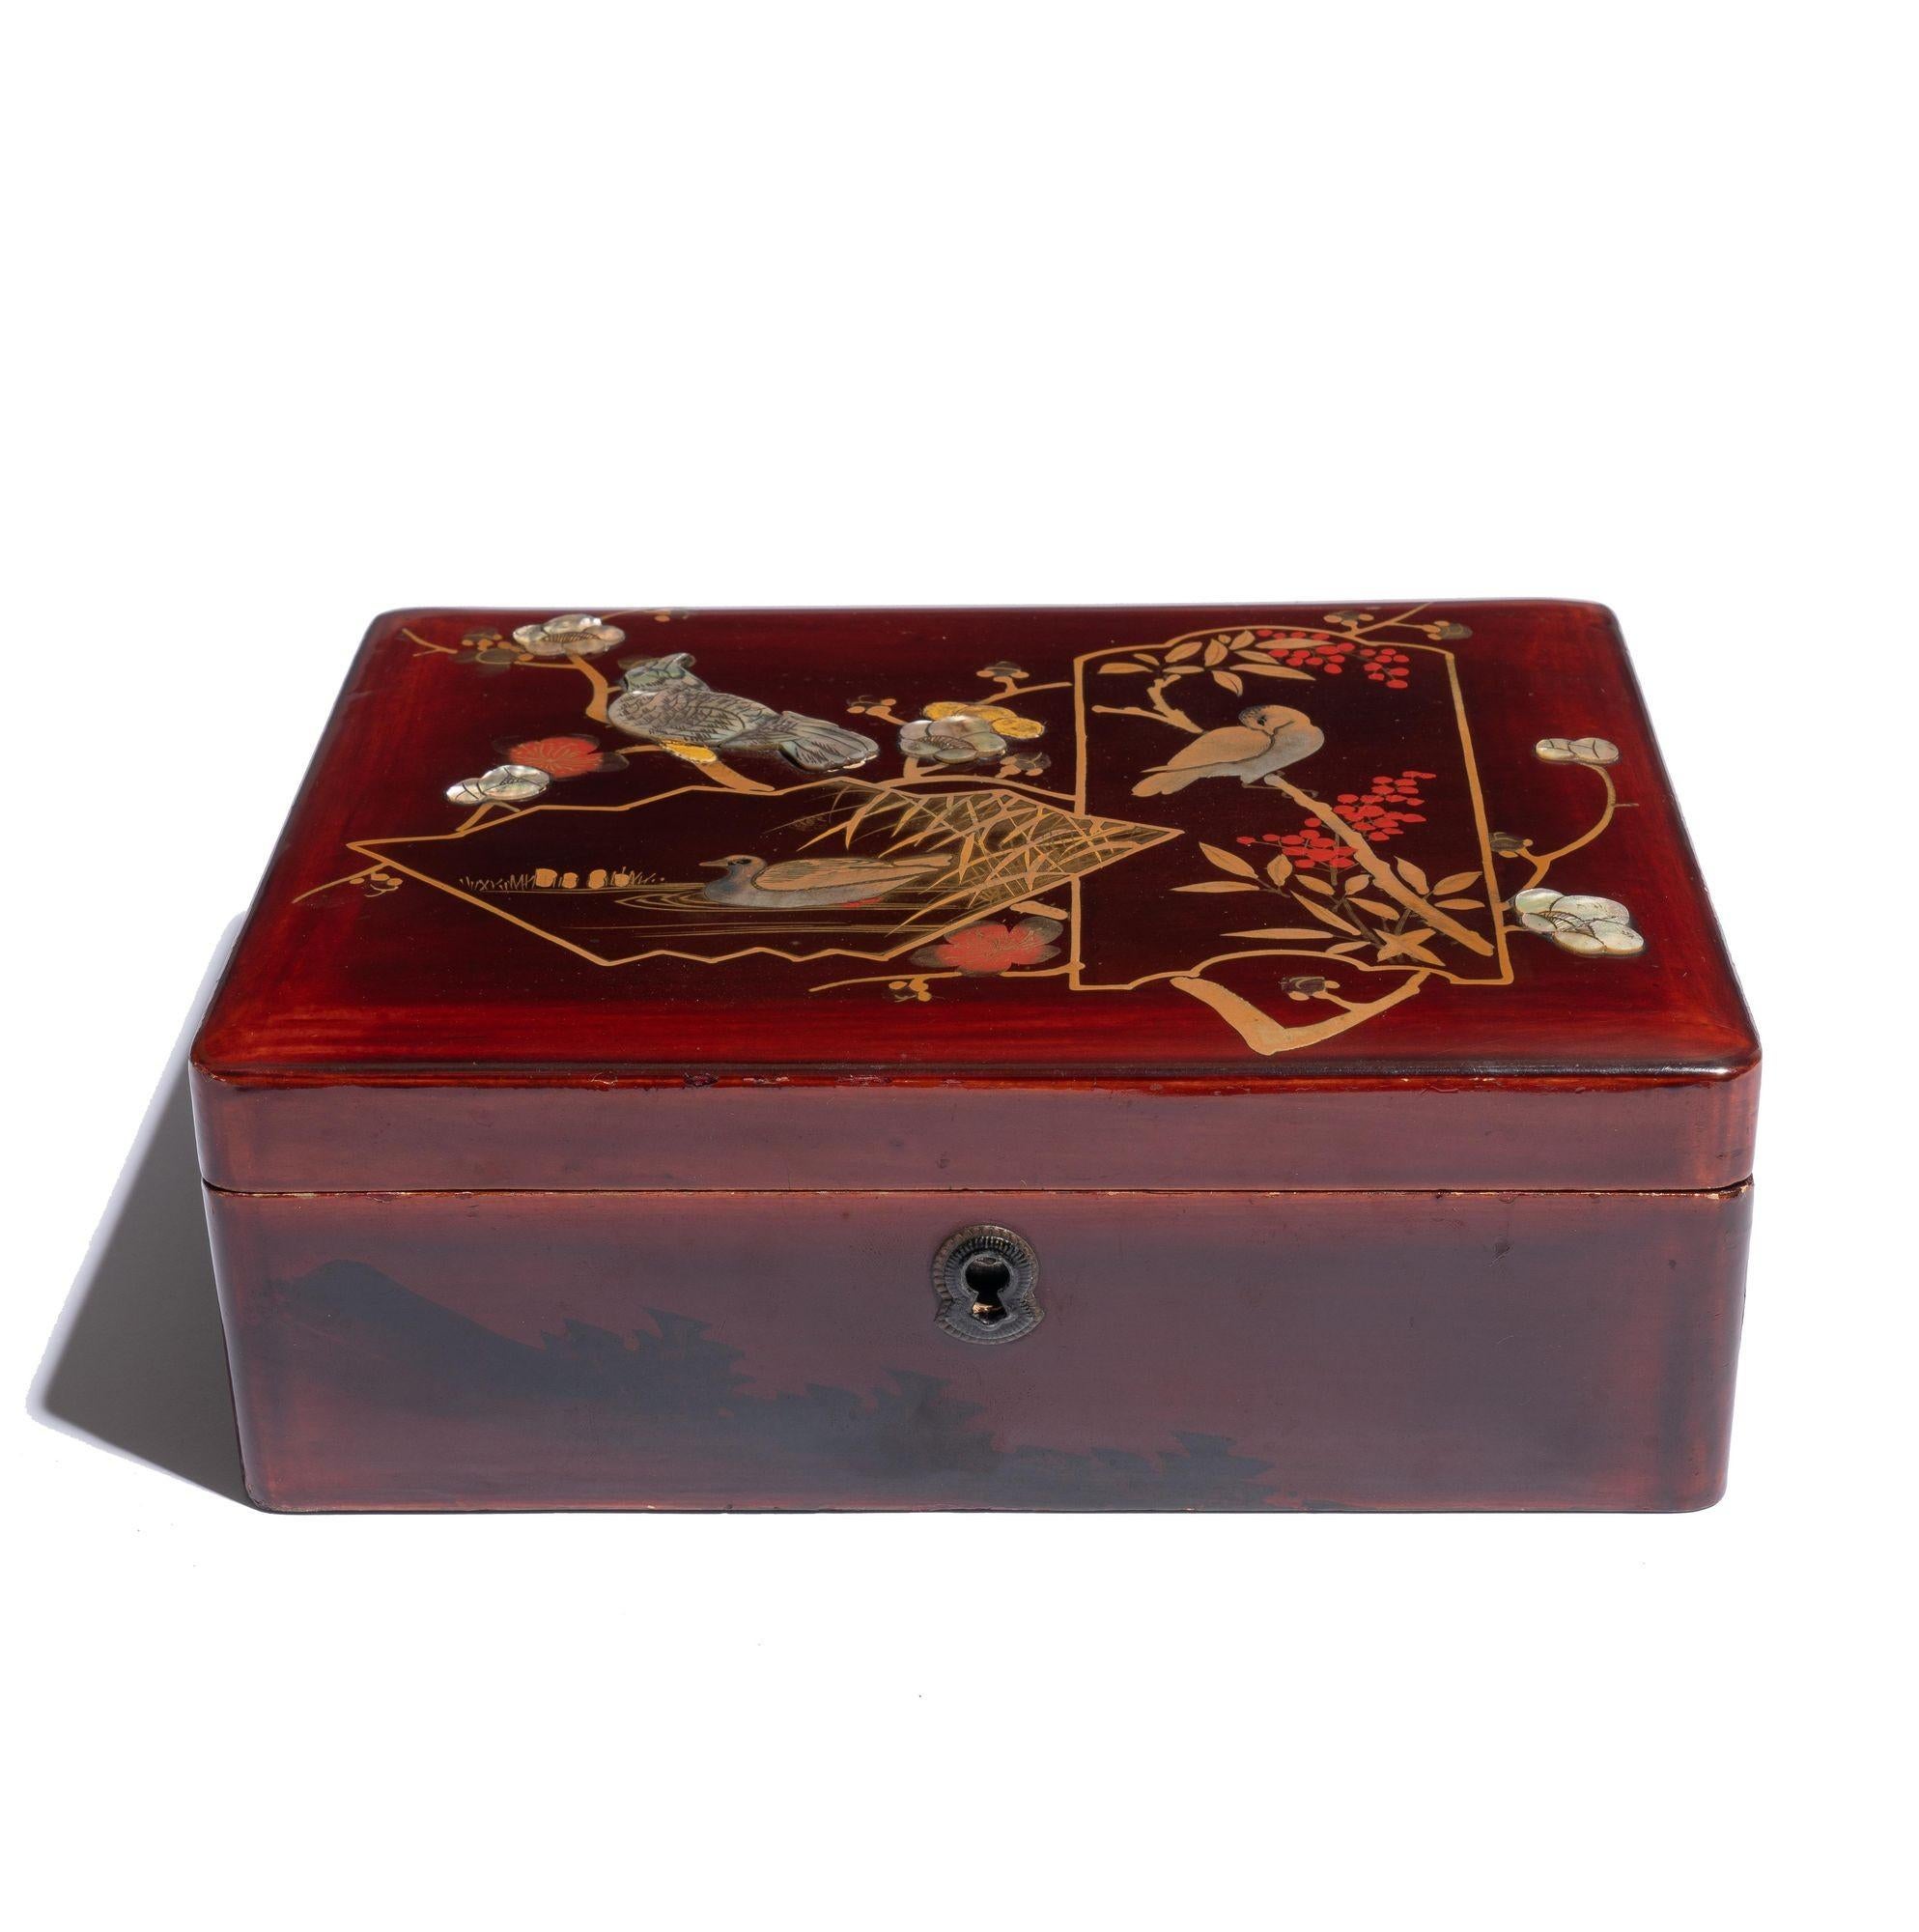 Antique Japanese Lacquered, Enameled, and Inlaid Box With Hinged Lid, c. 1800's In Good Condition For Sale In Kenilworth, IL